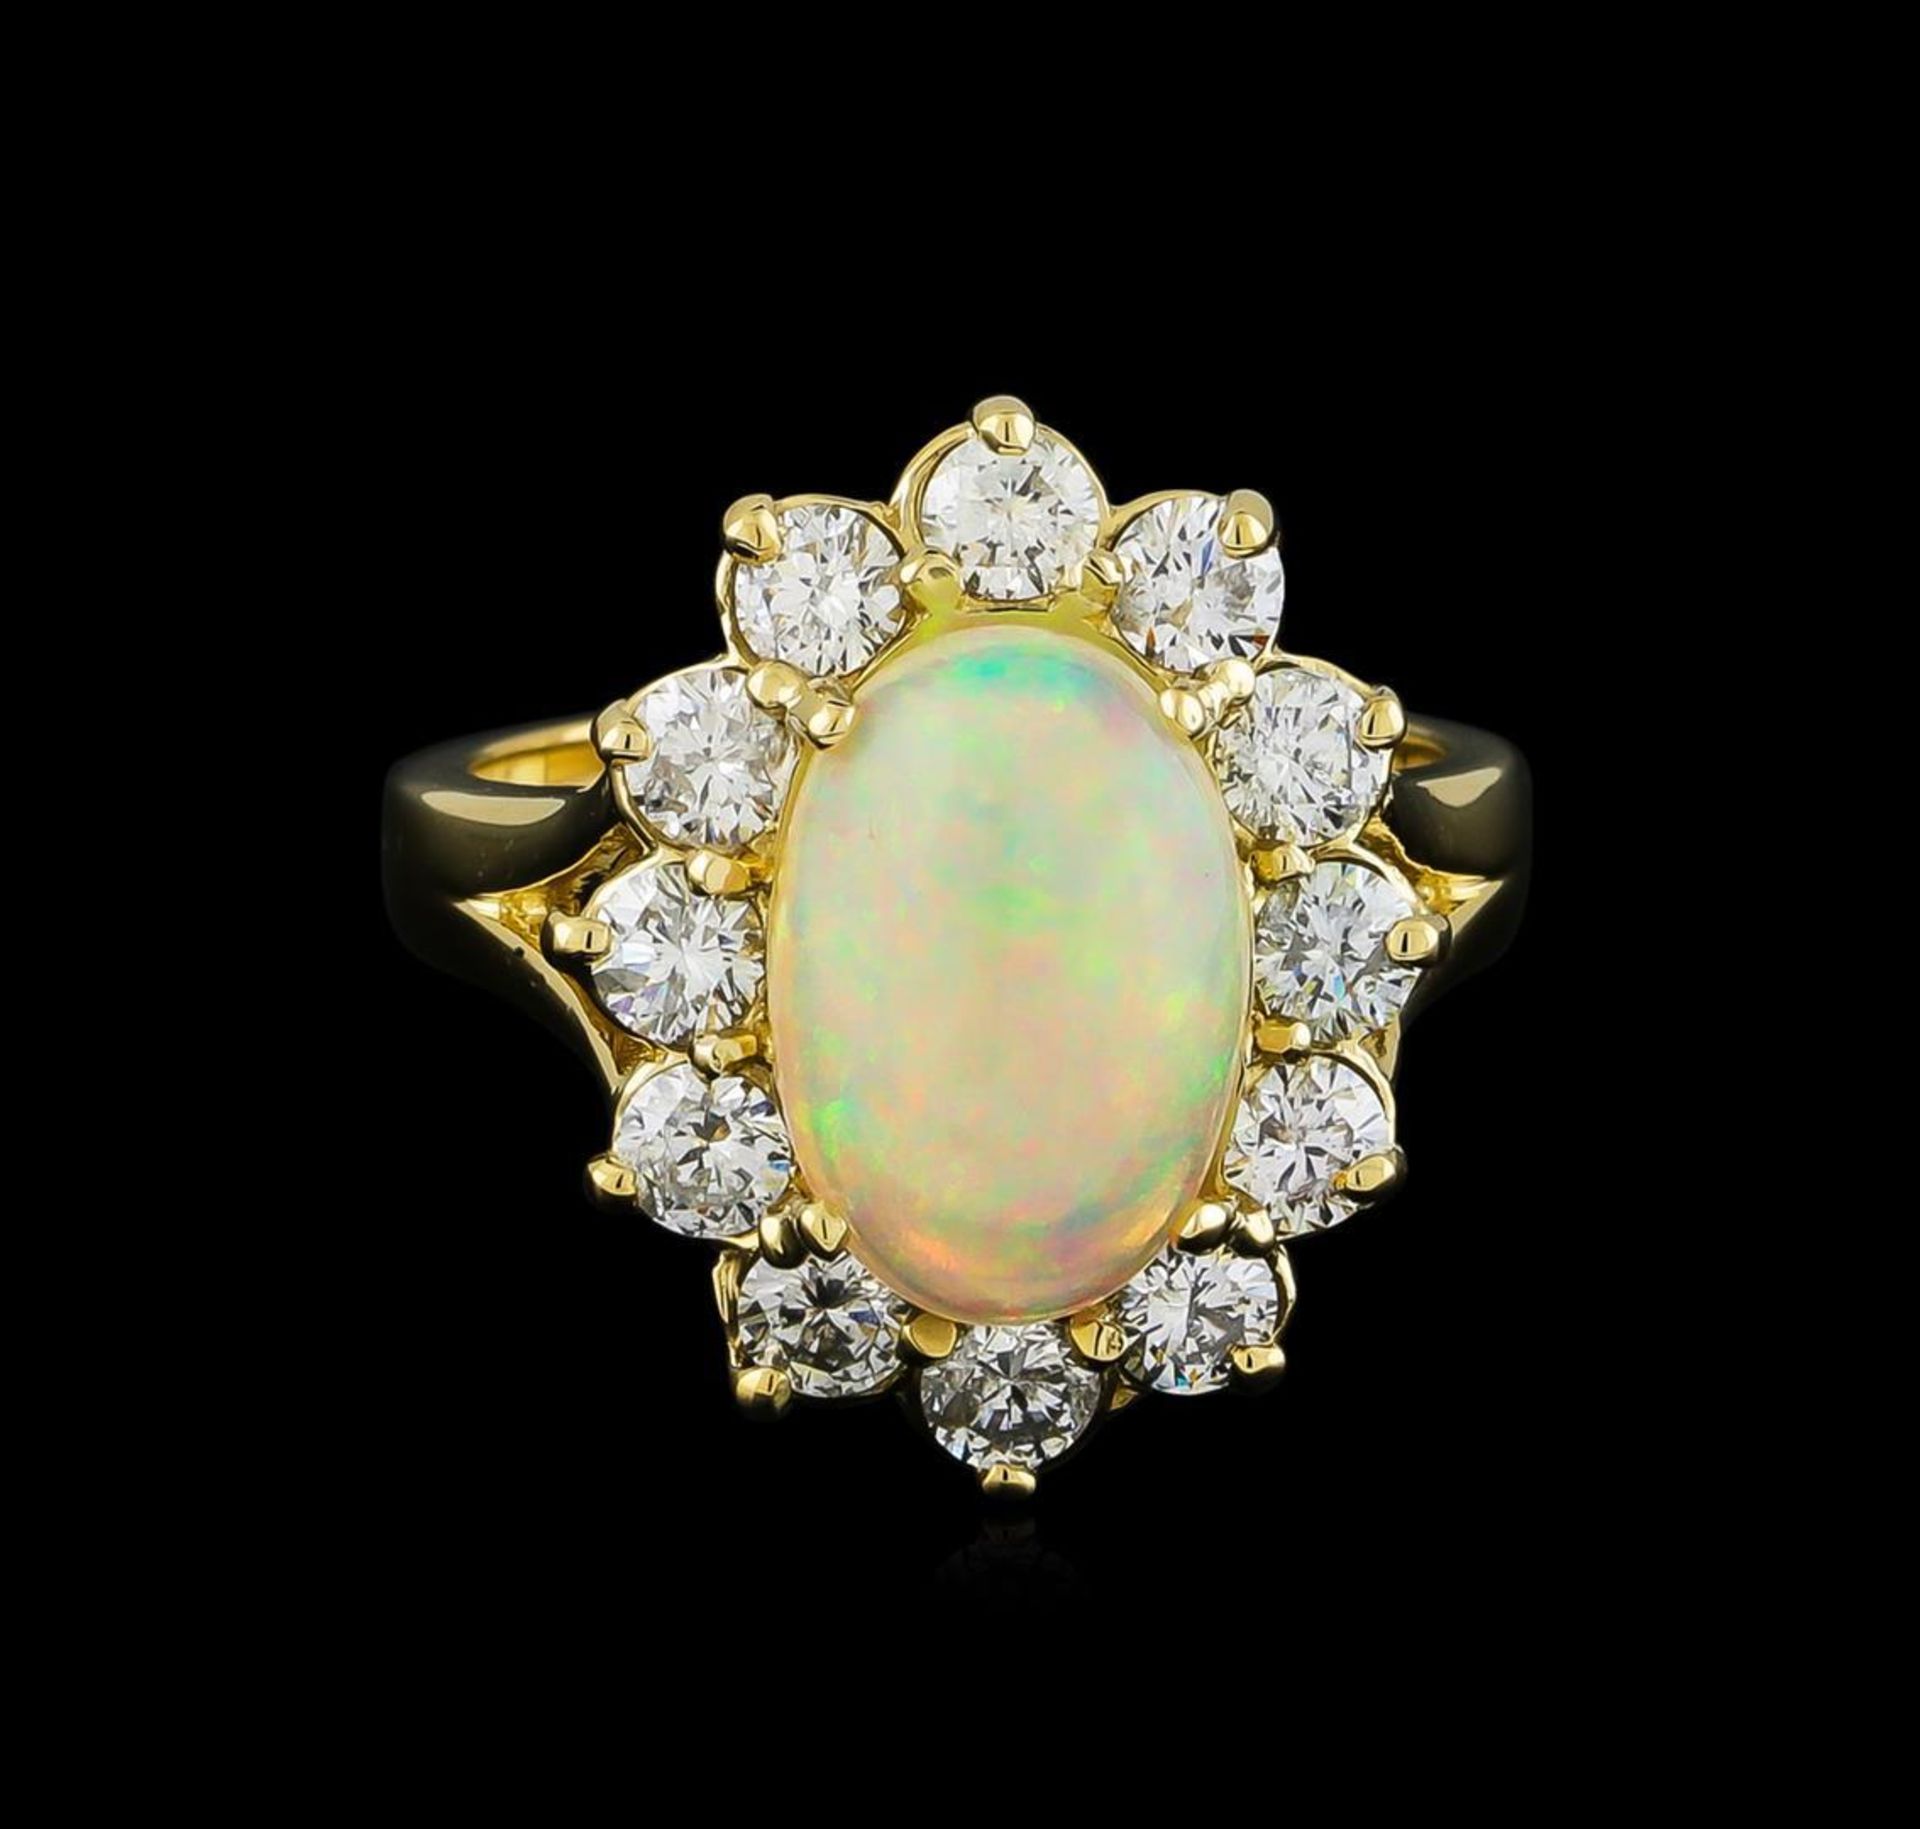 2.56 ctw Opal and Diamond Ring - 14KT Yellow Gold - Image 2 of 5